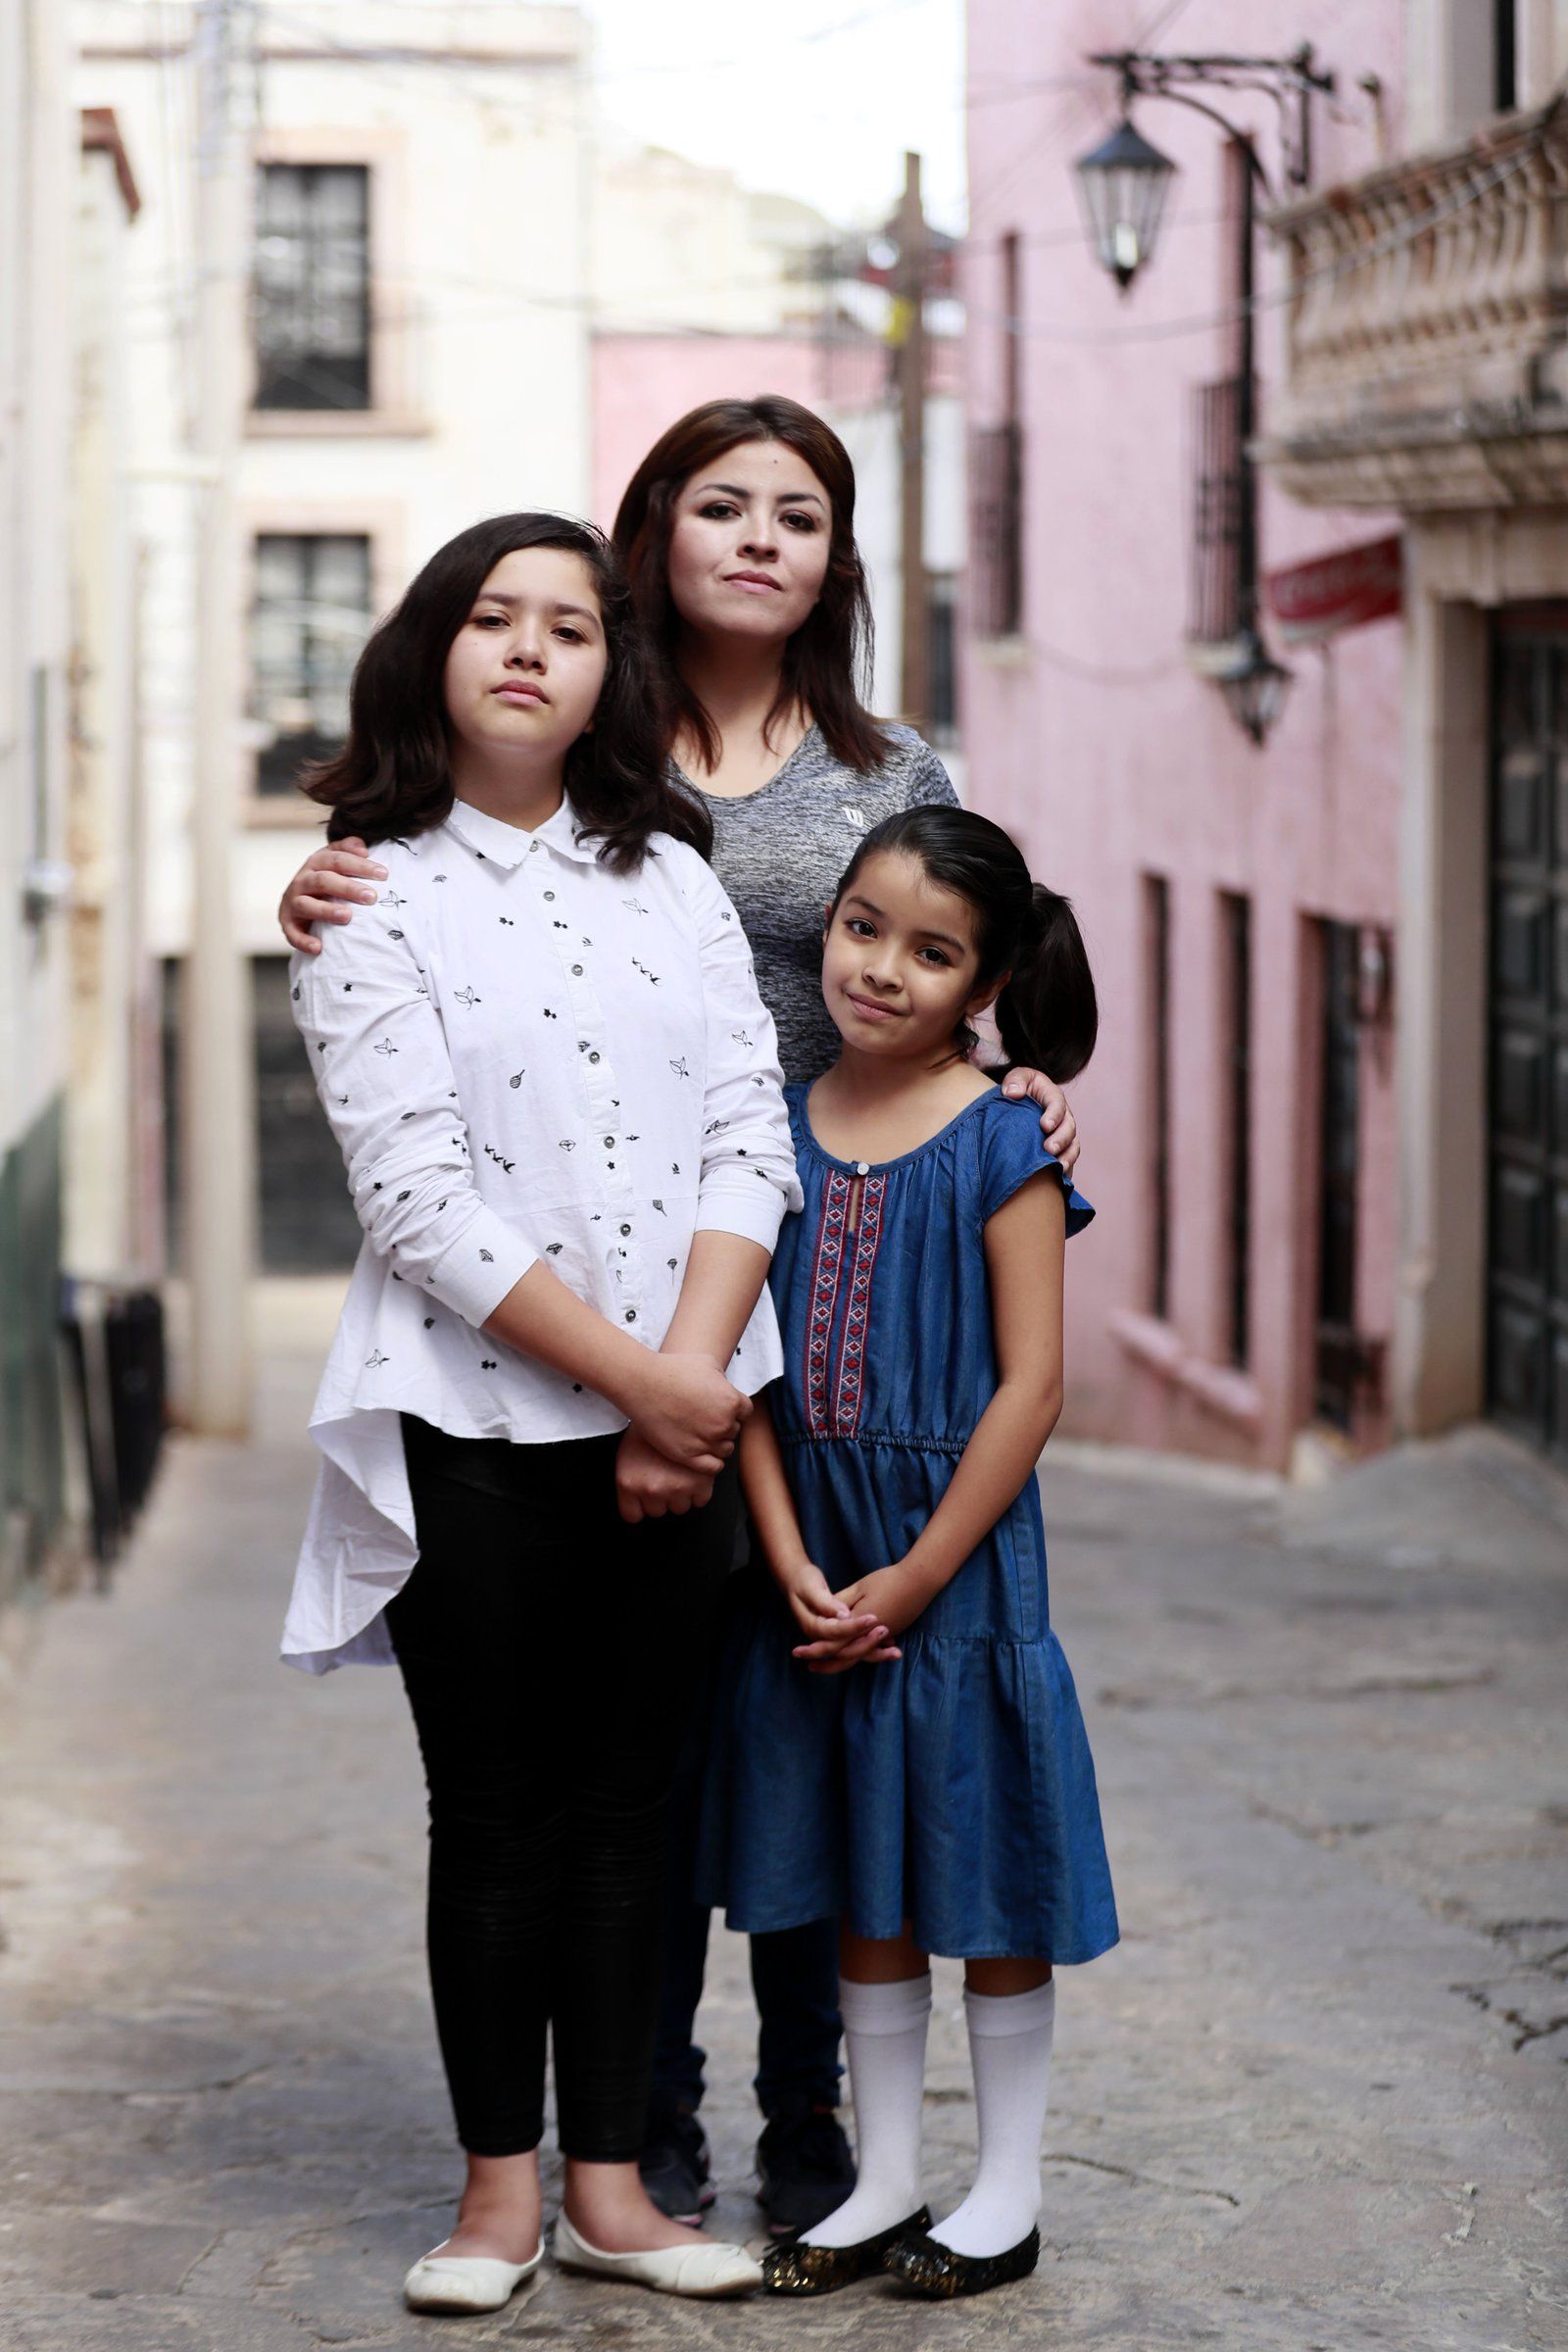 Evelyn Leyva Gómez says she found no help for her daughters Tori, 11, and Ellie, 9, as they tried to keep up in school after moving from the U.S. Image by Erika Schultz. Mexico, 2019. 